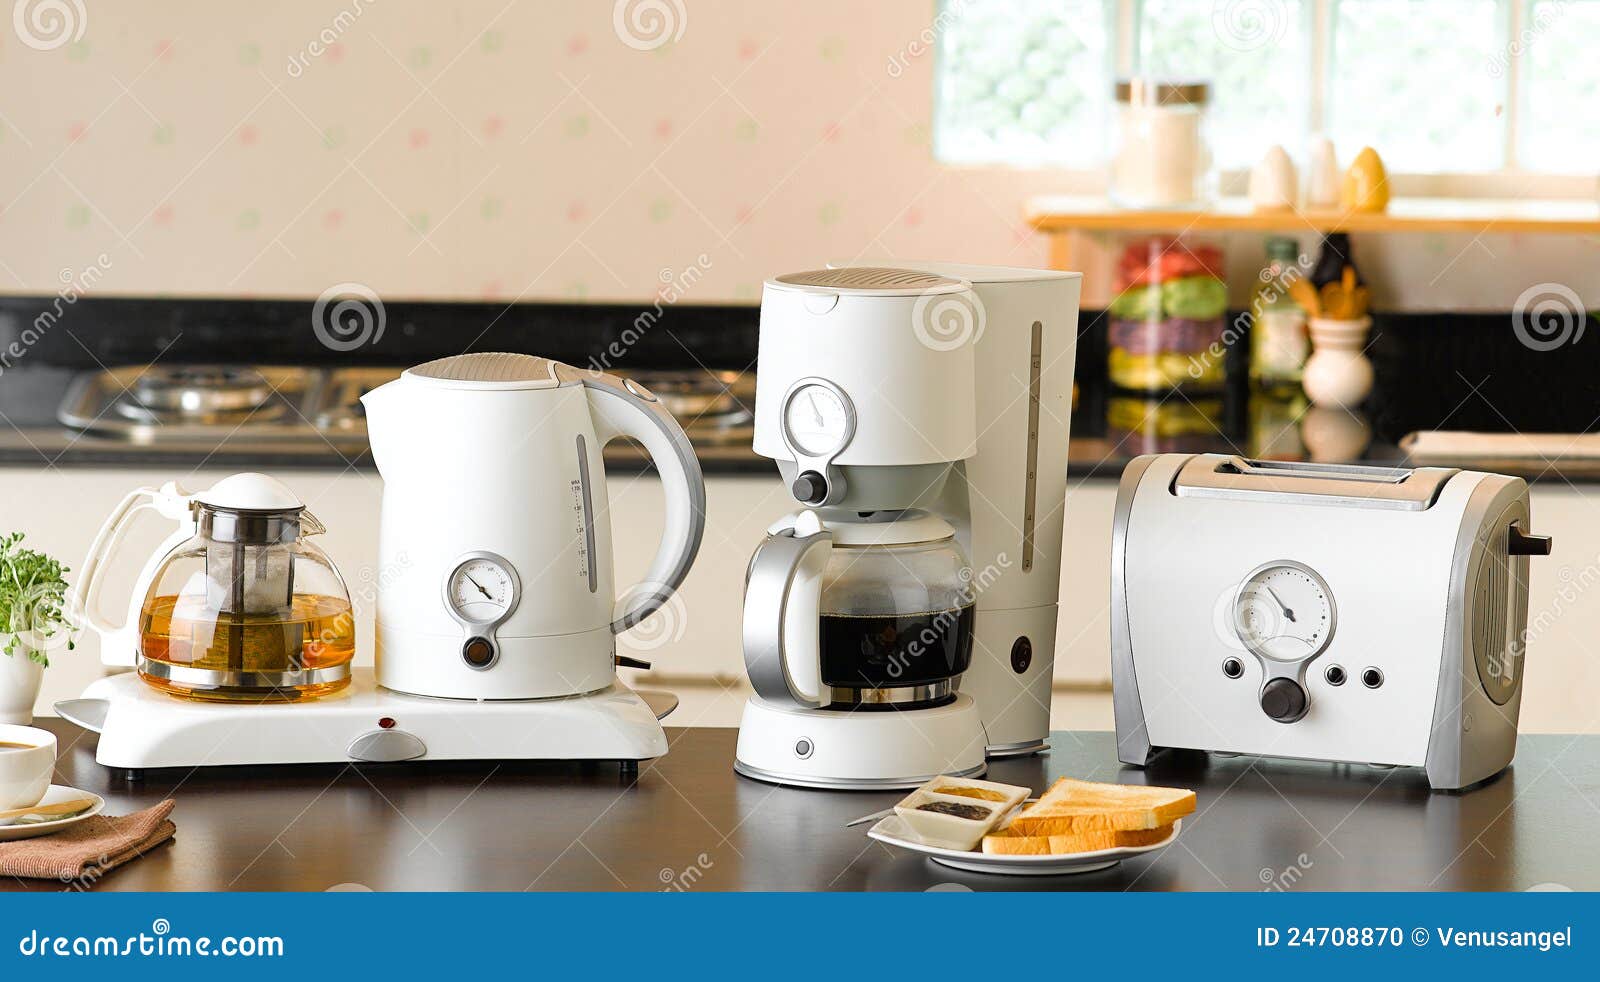 Coffee Blender And Boiler Machine Great For Makes Hot Drinks Stock Photo,  Picture and Royalty Free Image. Image 17584498.